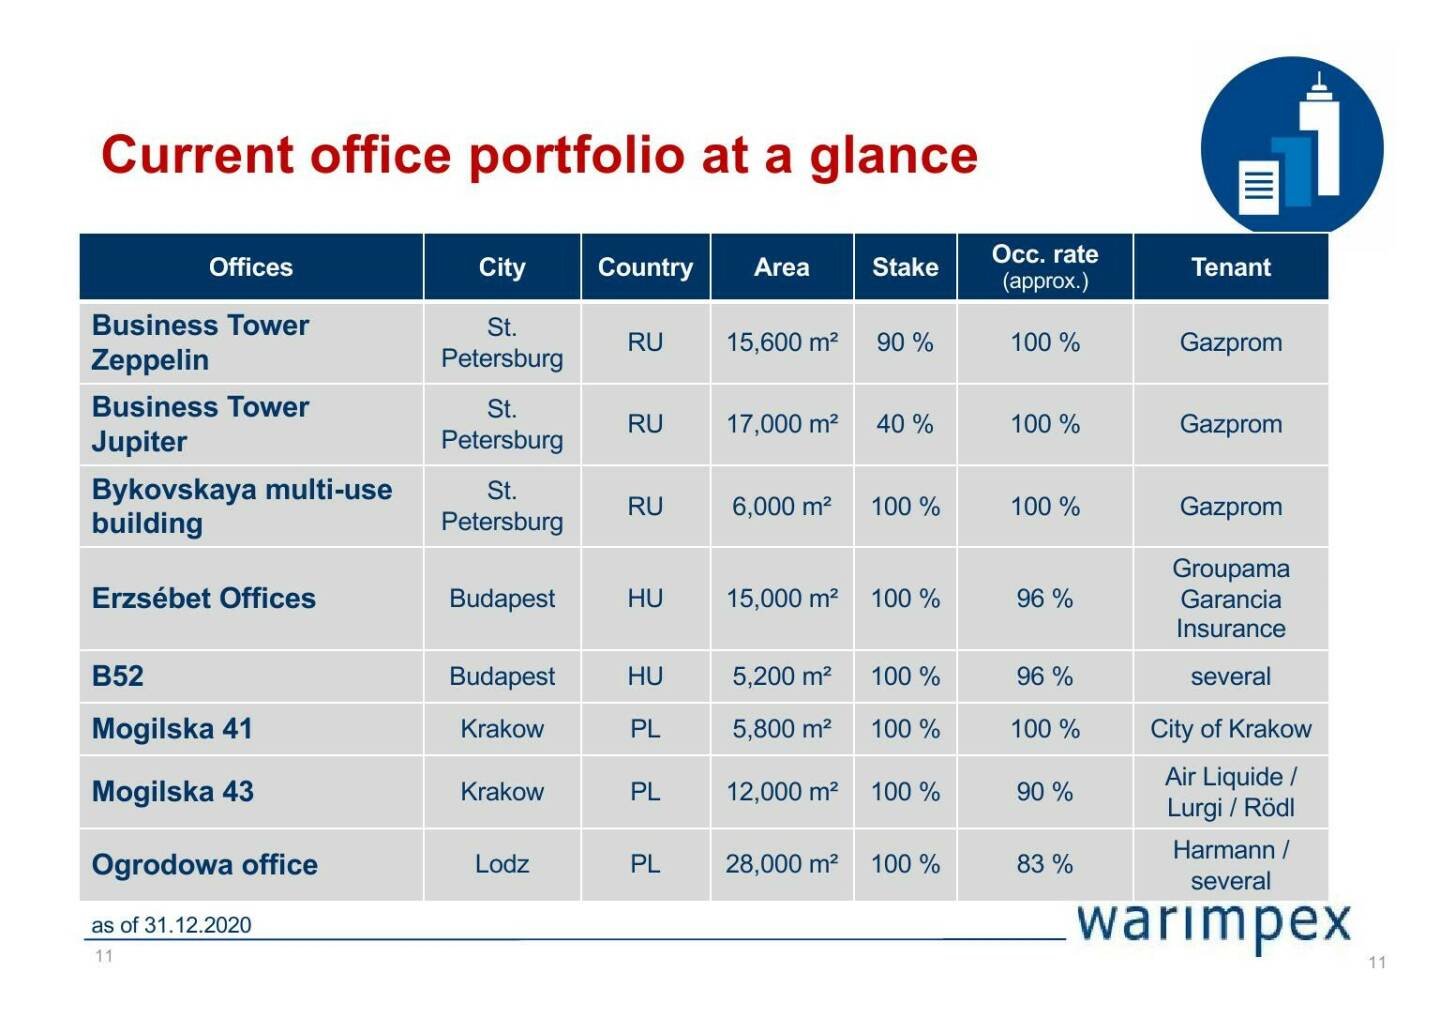 Warimpex - Current office portfolio at a glance